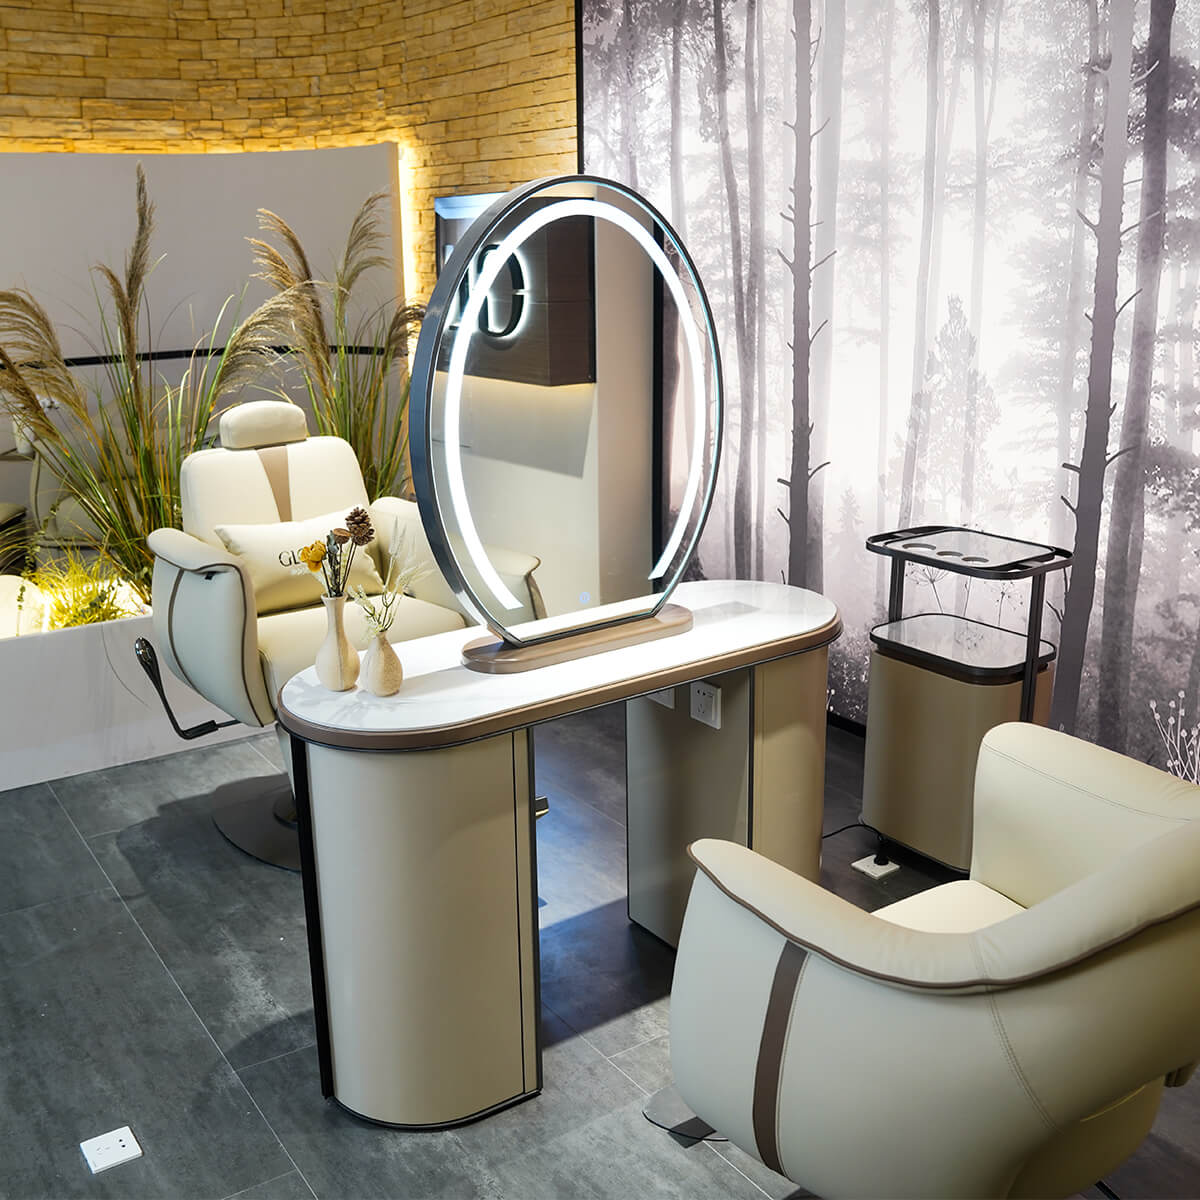 Glorall salon mirror station for hair salon studio mirror with LED light with bench